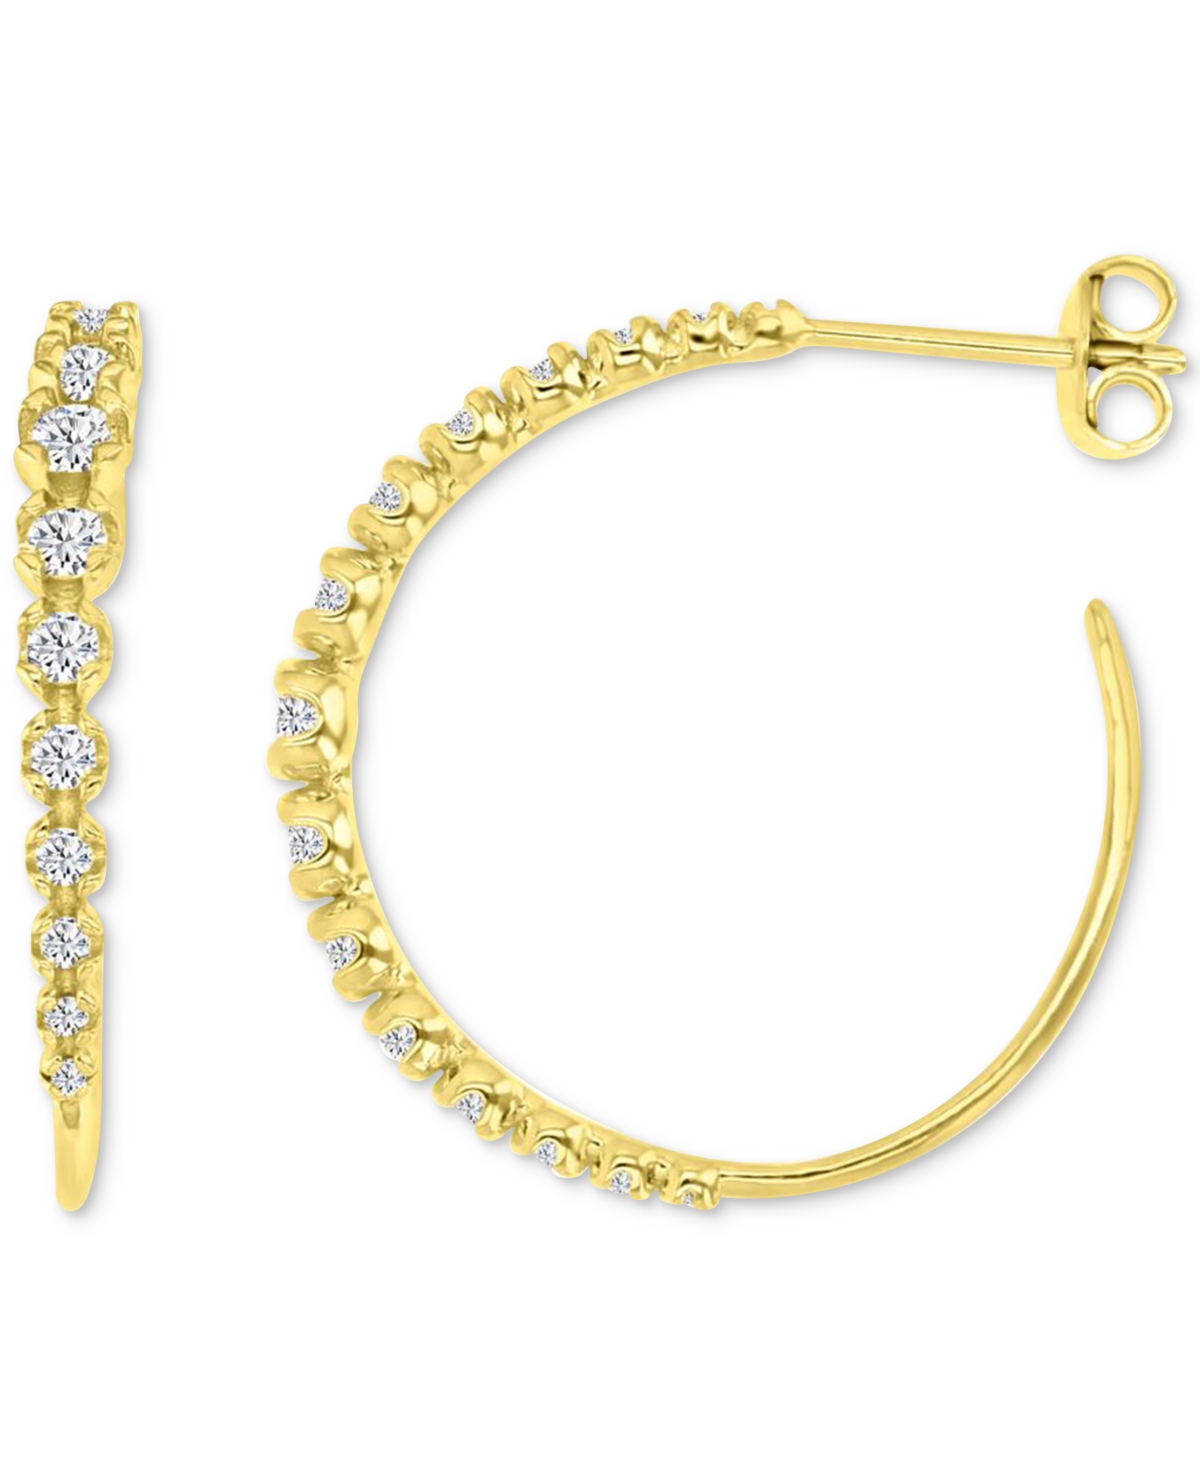 Cubic Zirconia Graduated & Tapered Small Hoop Earrings, 1" - Gold